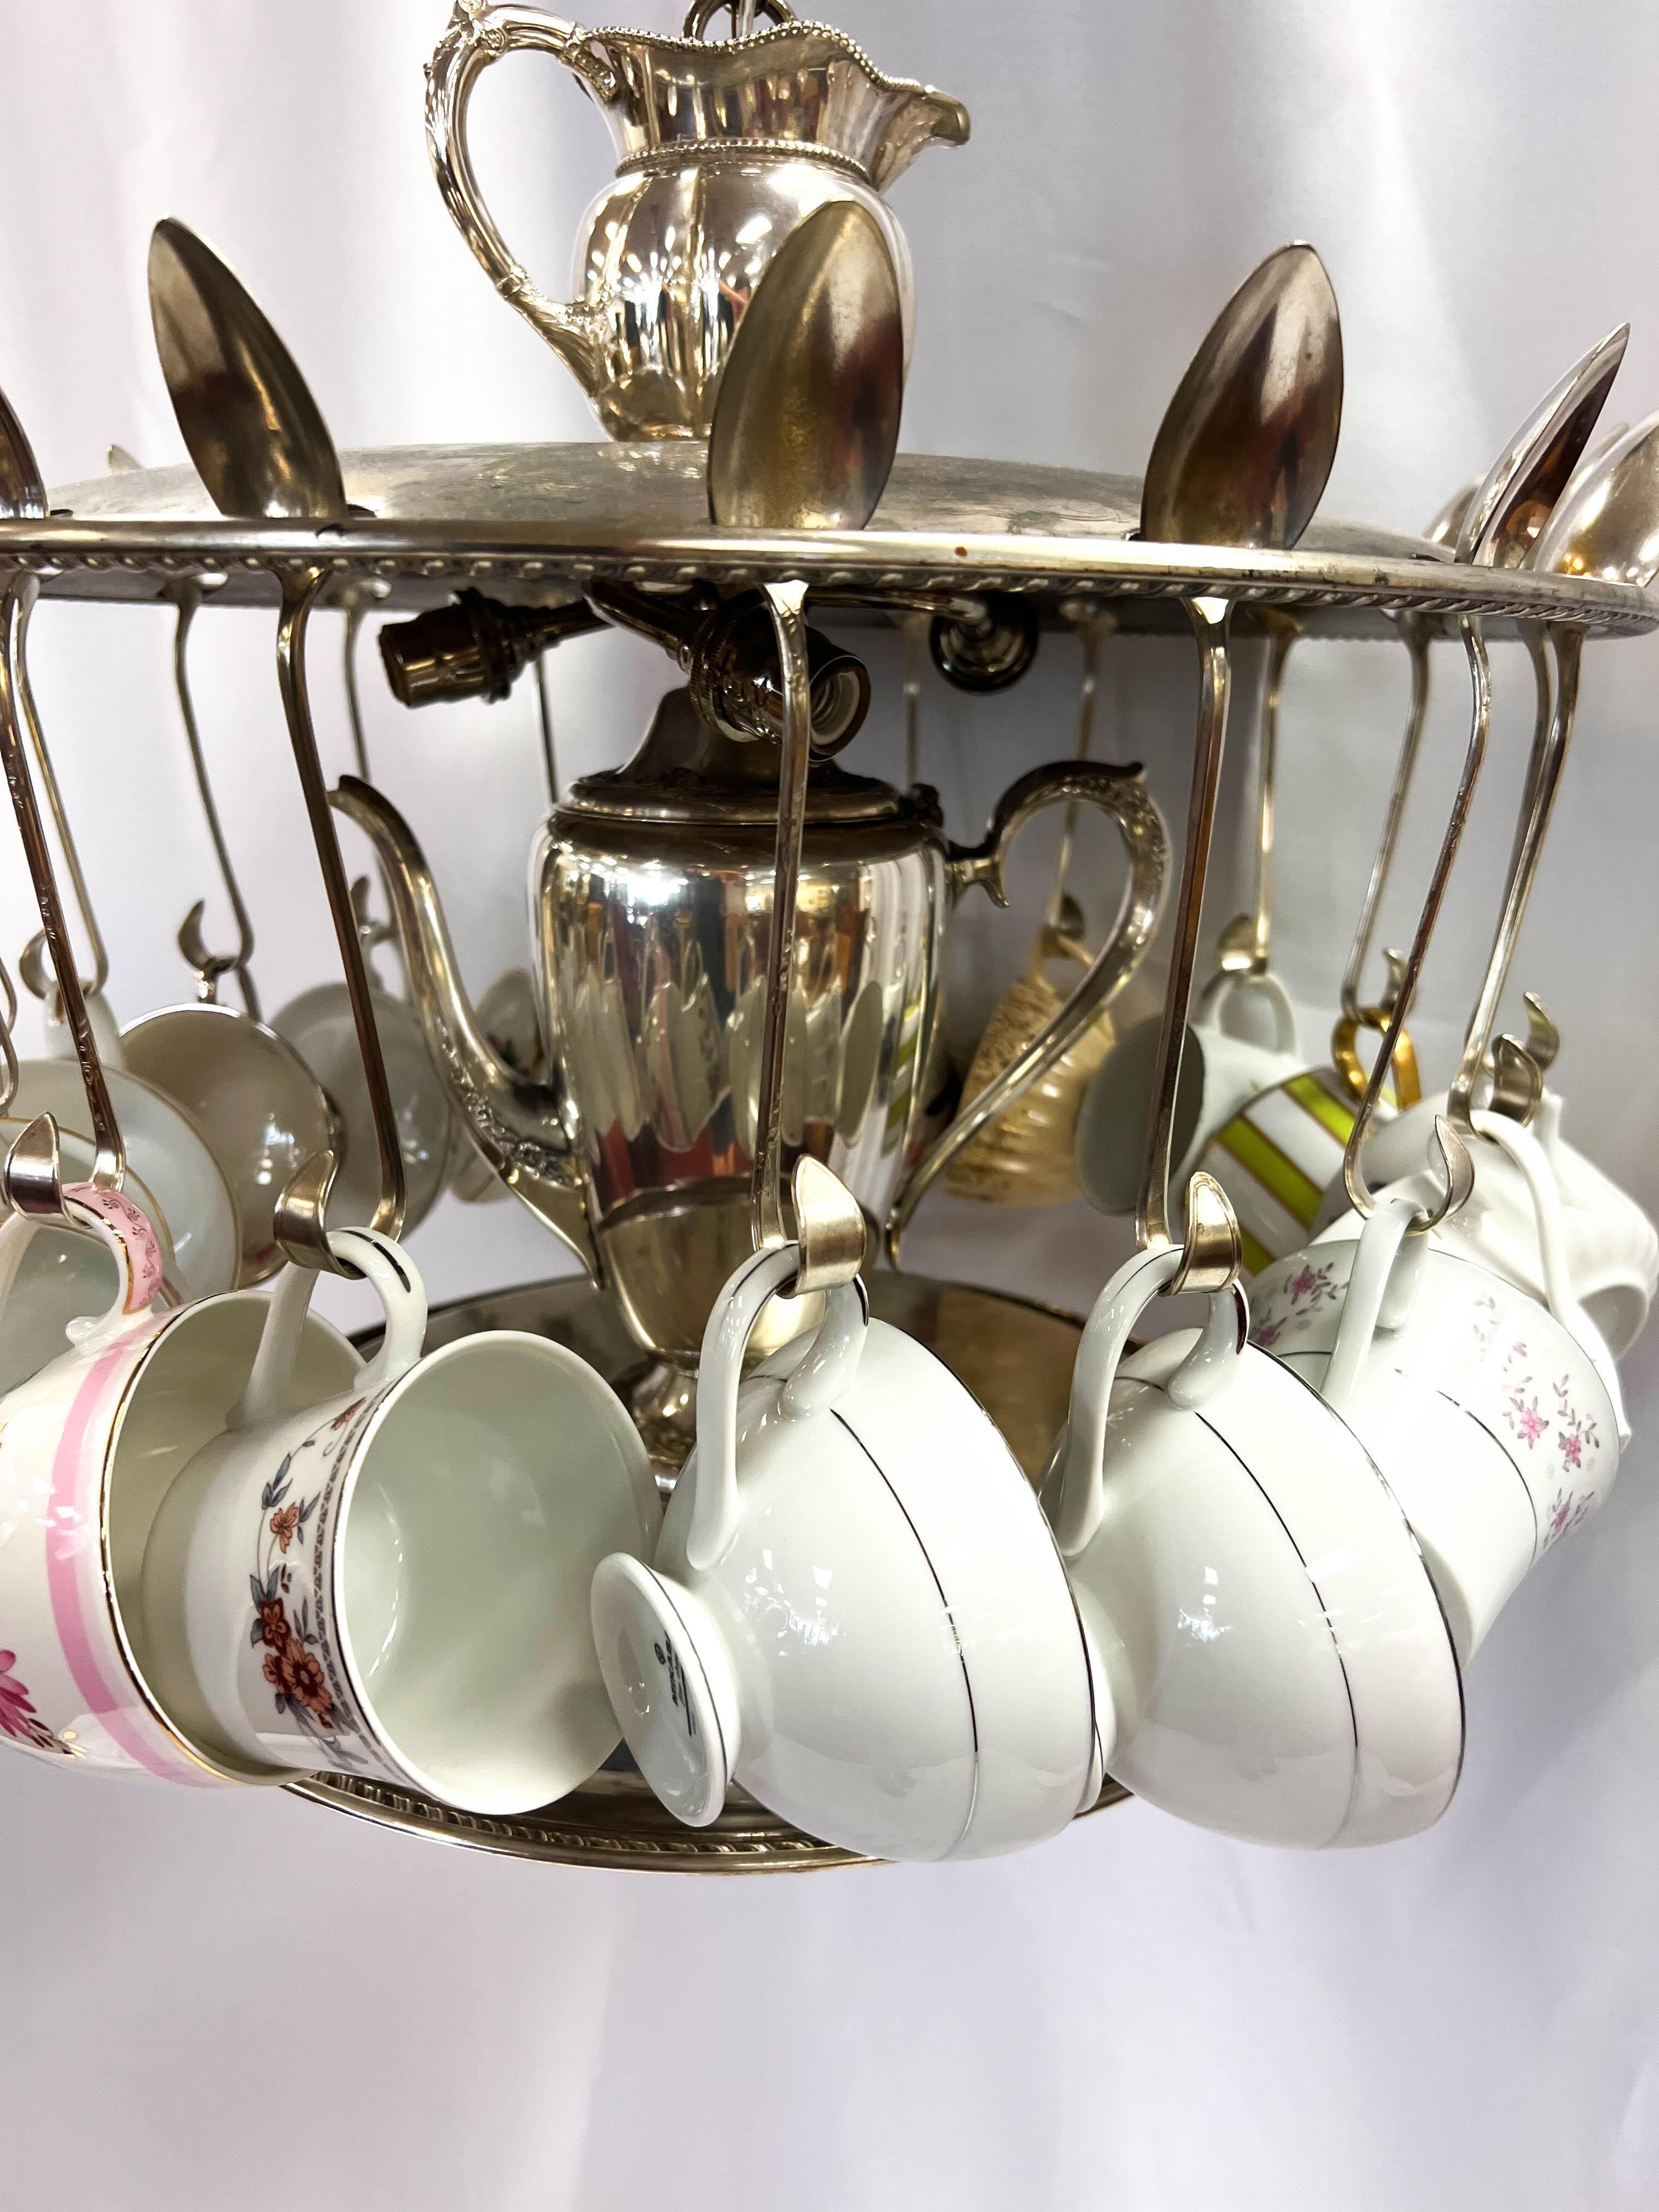 American One-Of-A-Kind Handcrafted Teacup Chandelier